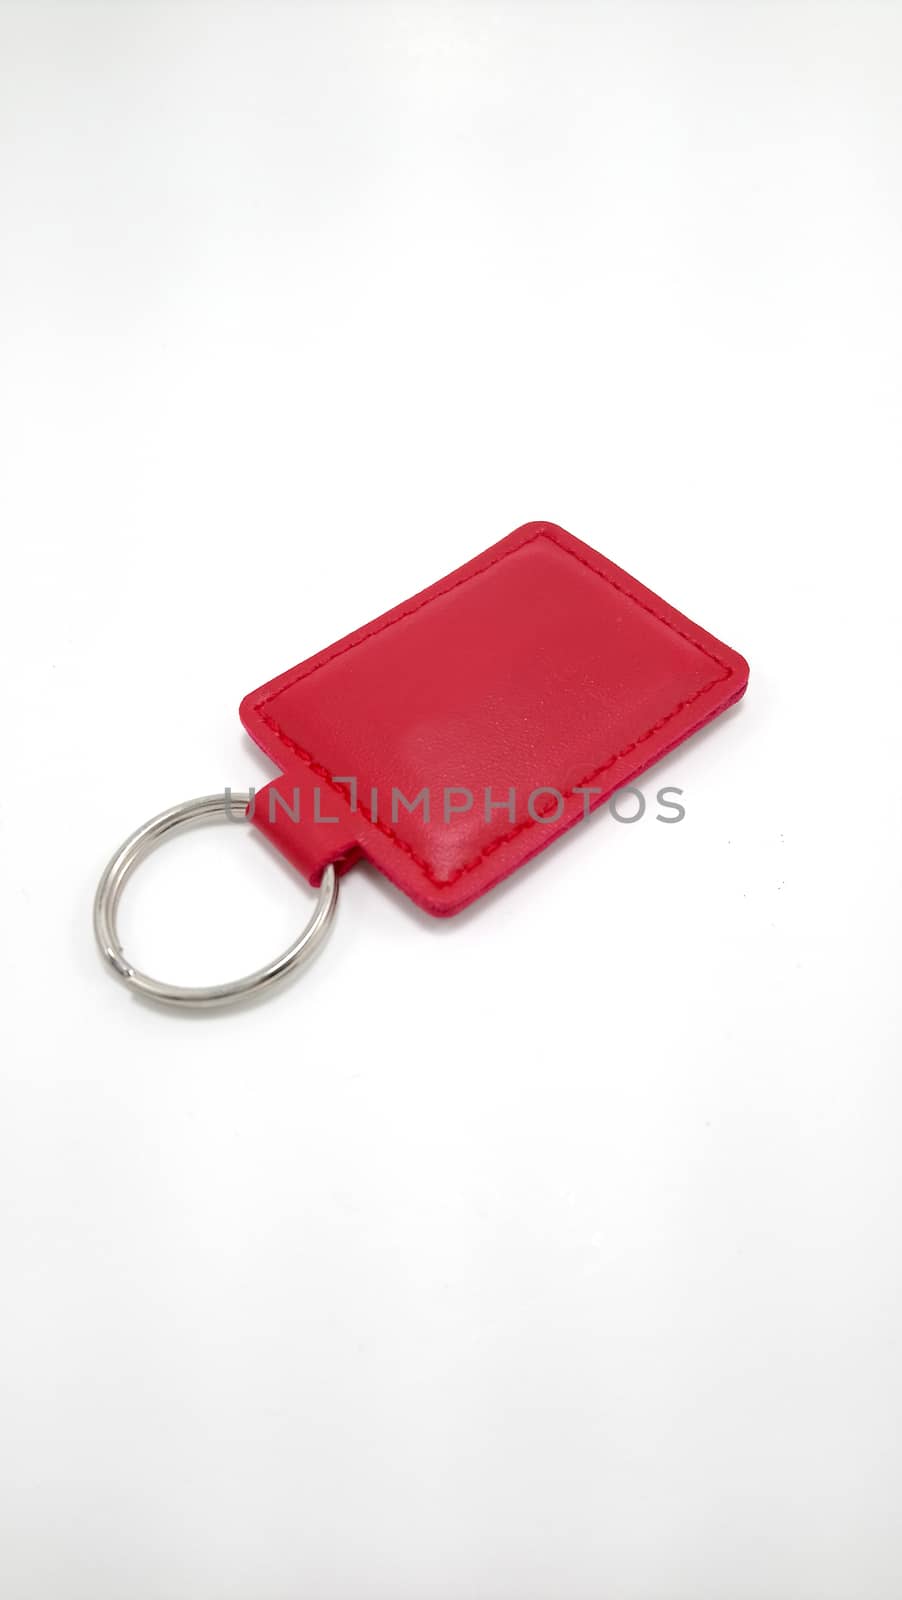 Red leather small portable keychain by imwaltersy